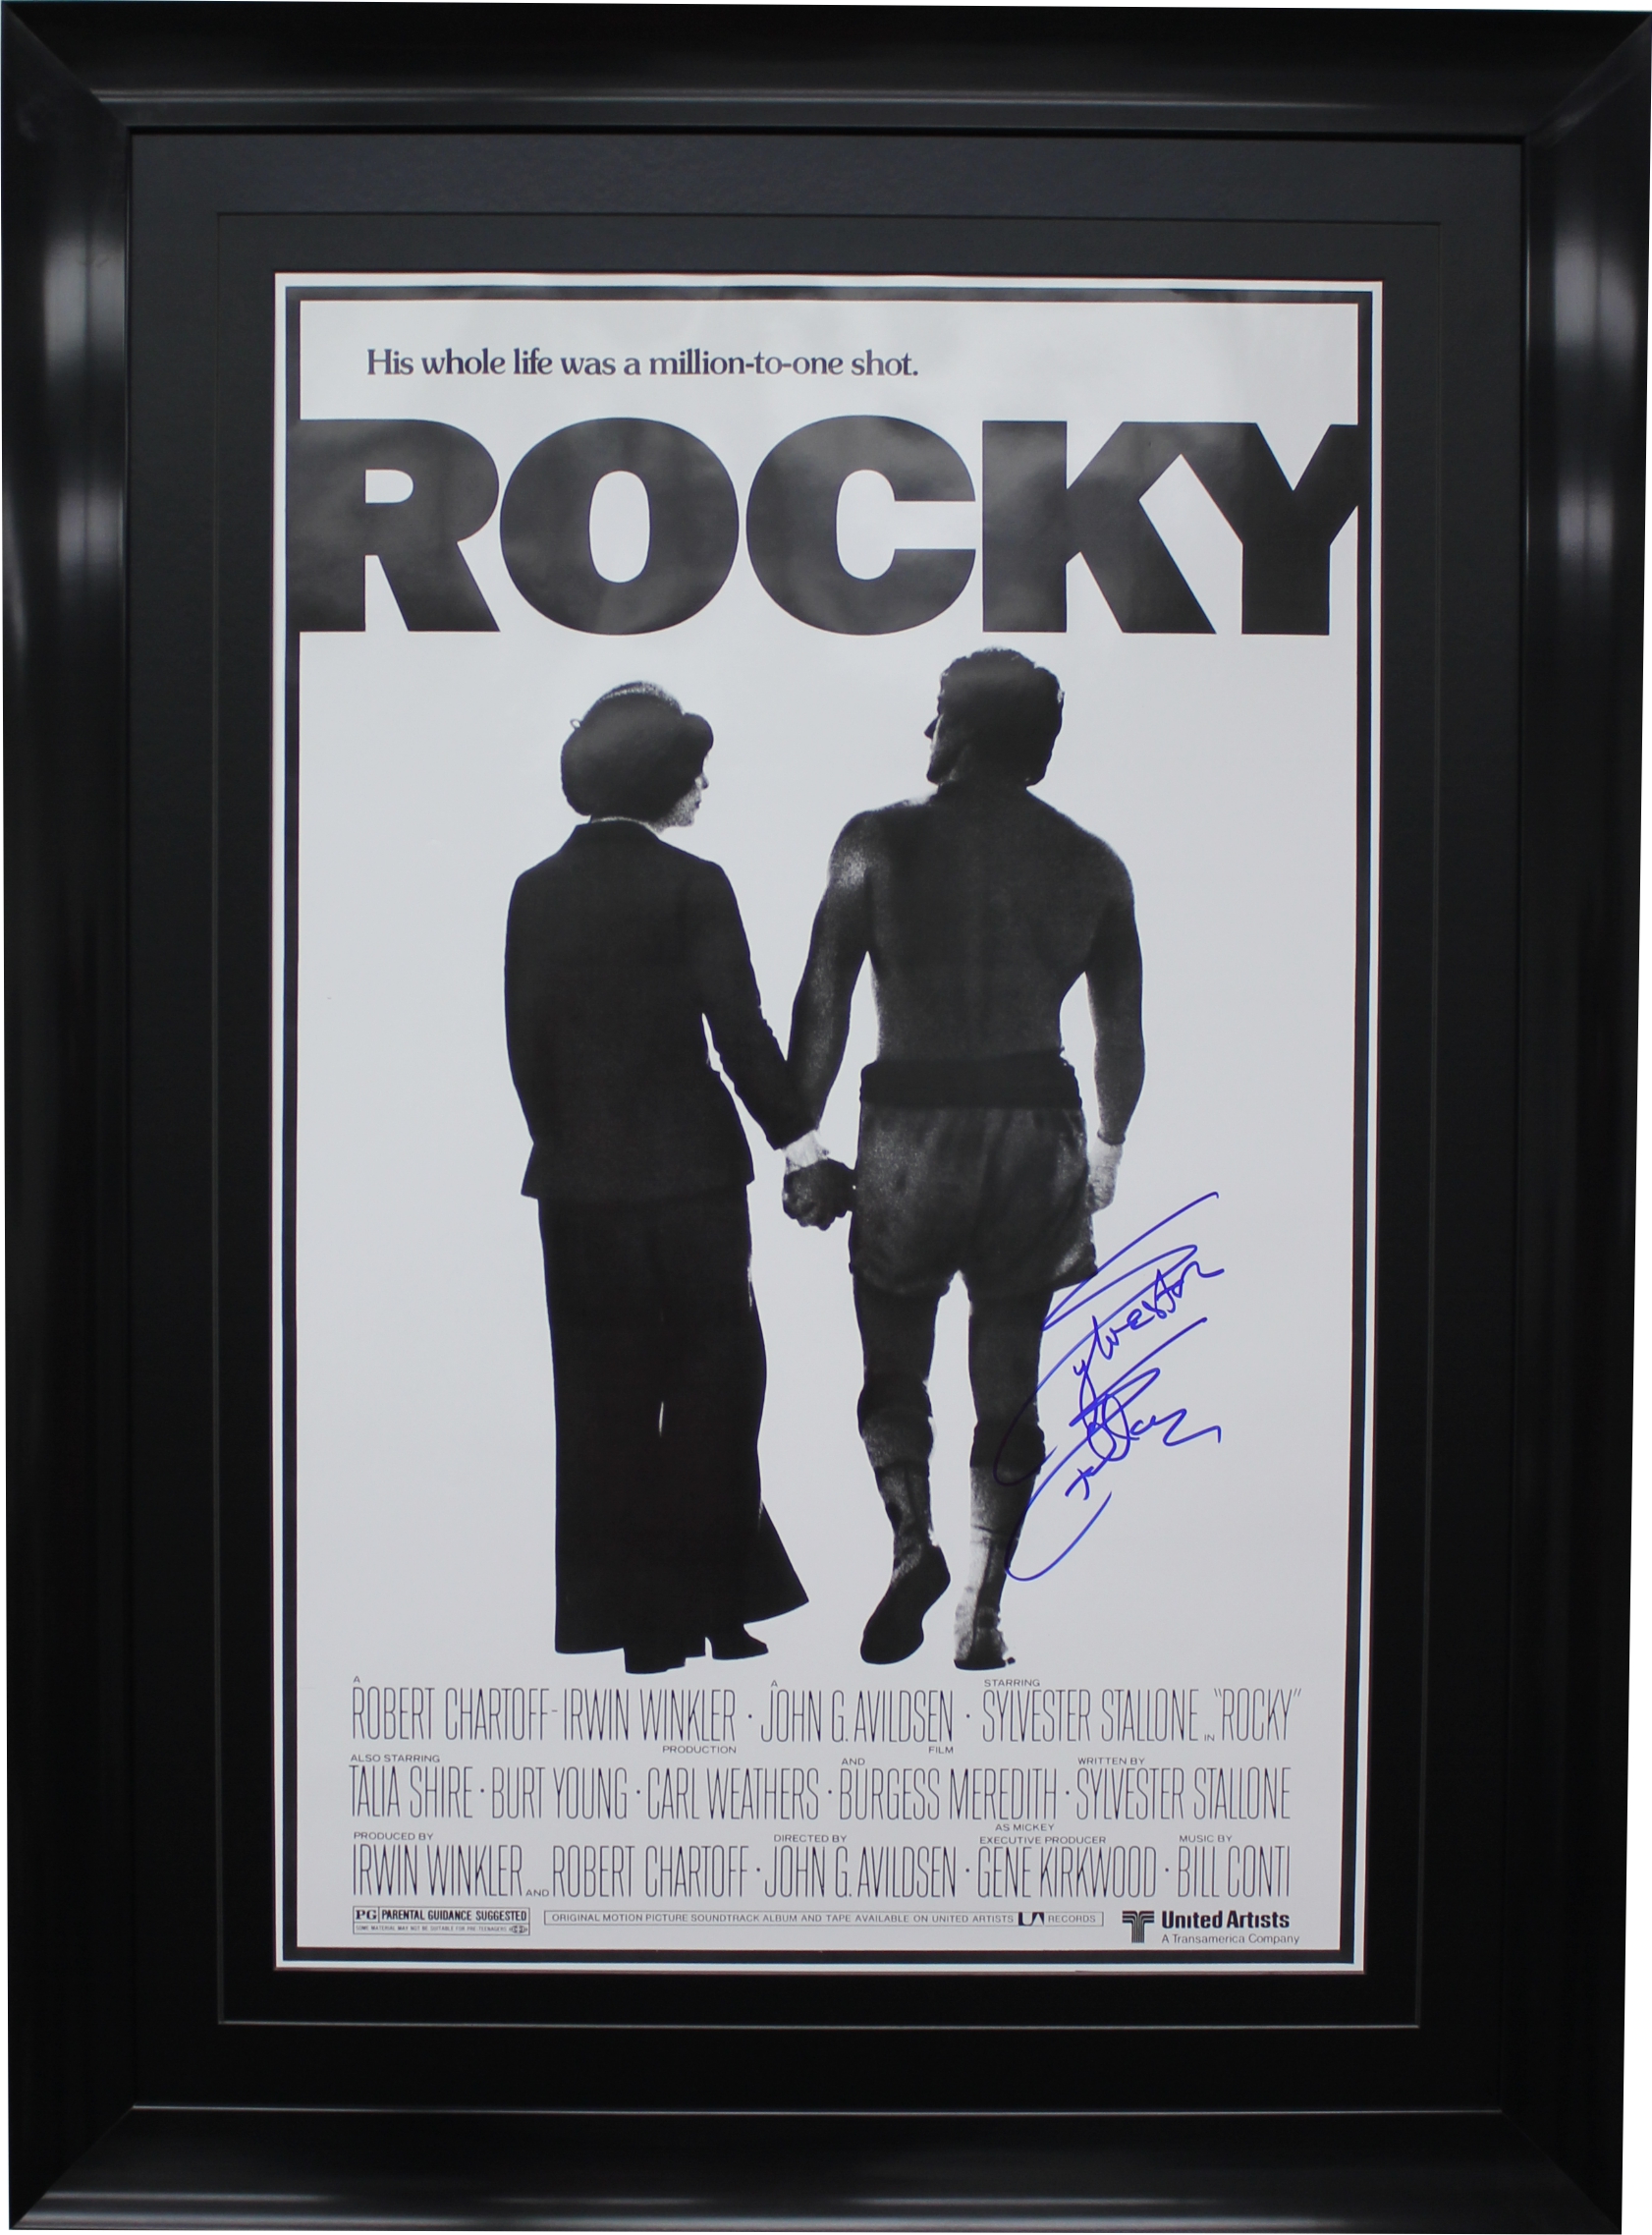 ROCKY MOVIE POSTER HIS WHOLE LIFE WAS MILLION TO ONE Premium Black Wood Frame 